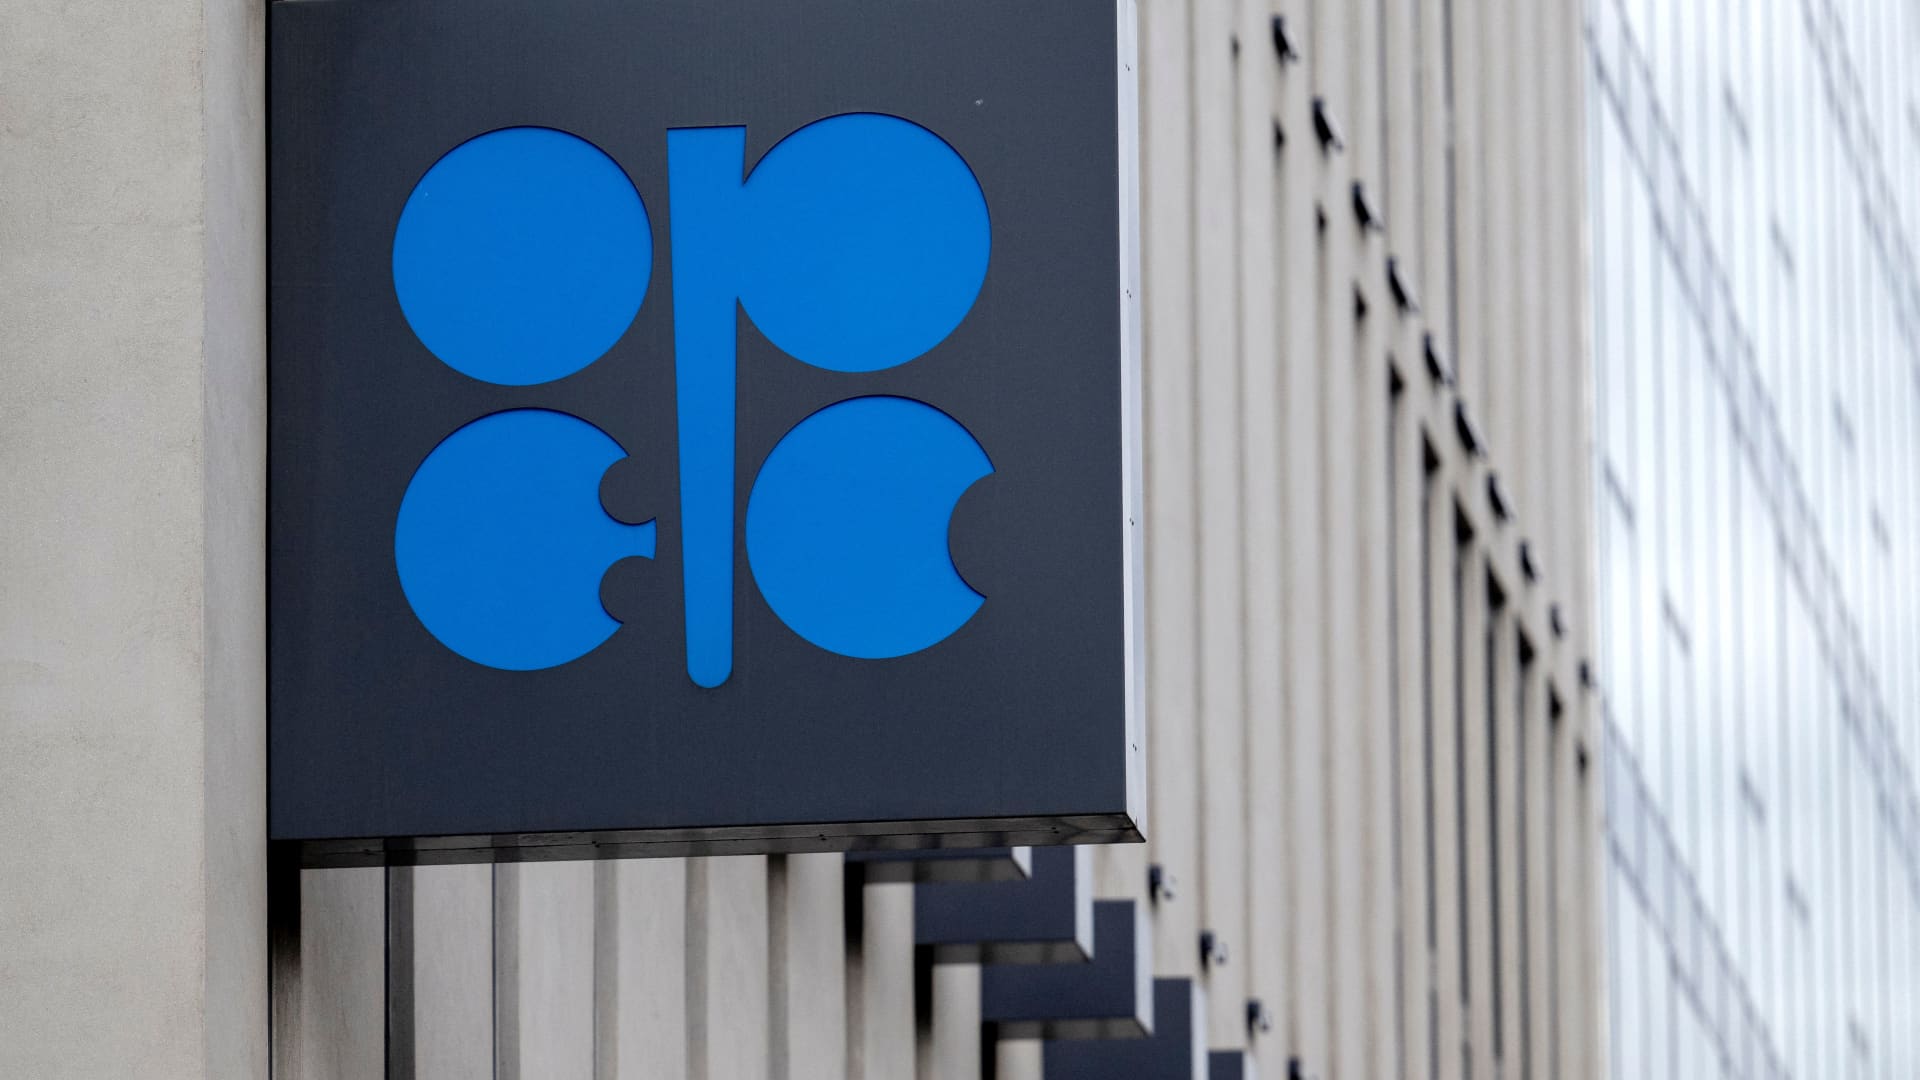 OPEC is barring some reporters from the WSJ, Reuters and Bloomberg from the meeting